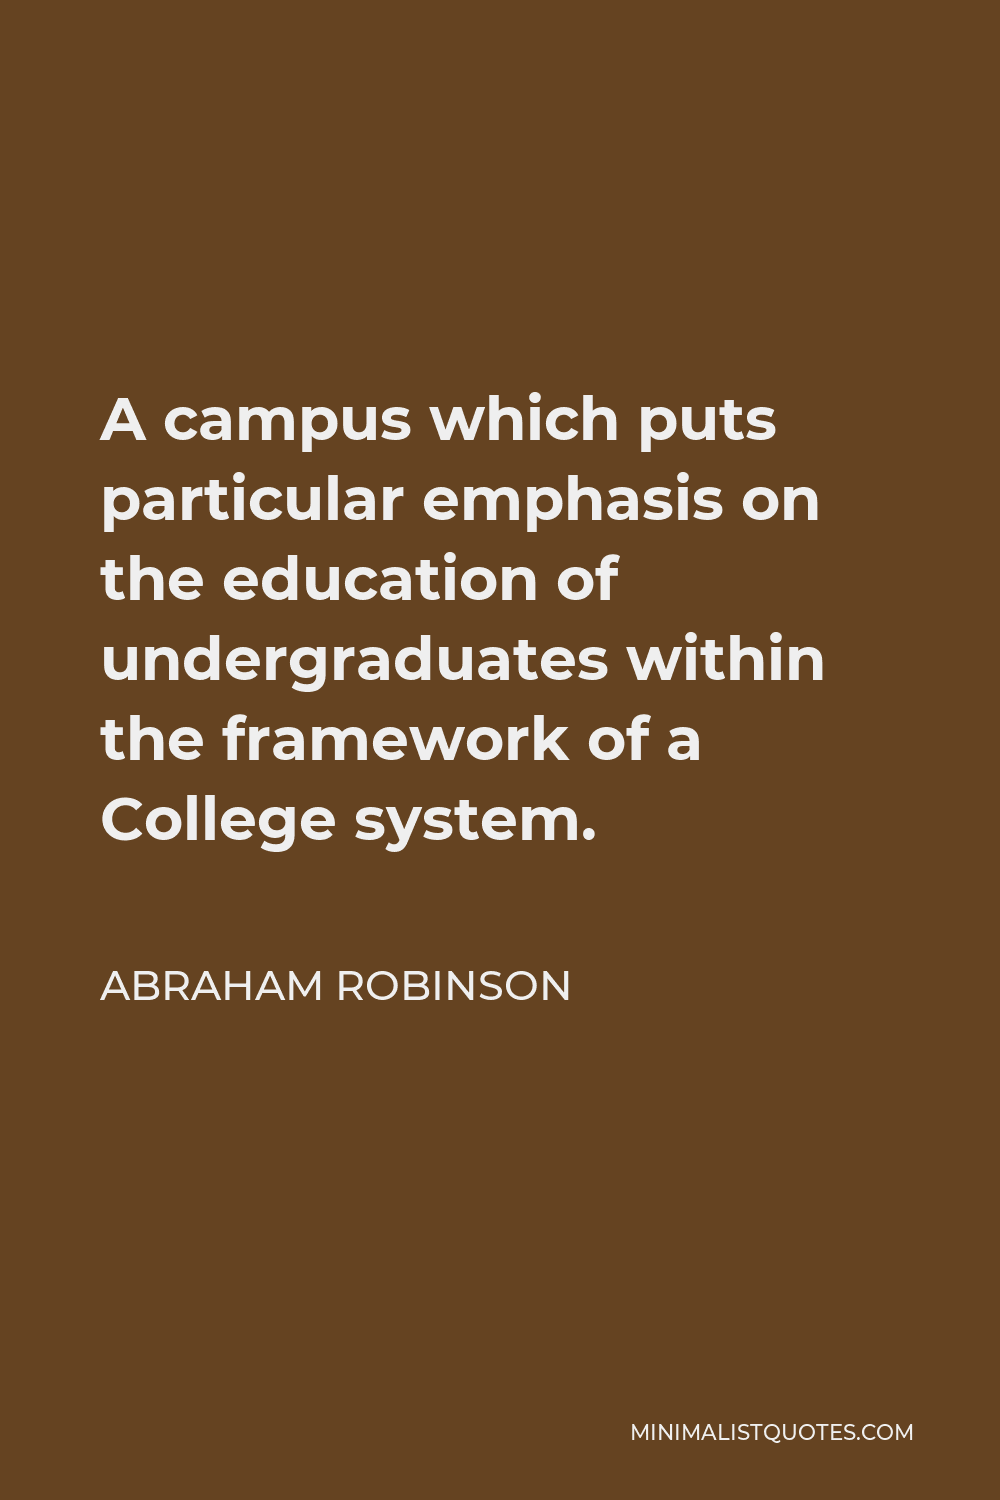 Abraham Robinson Quote - A campus which puts particular emphasis on the education of undergraduates within the framework of a College system.